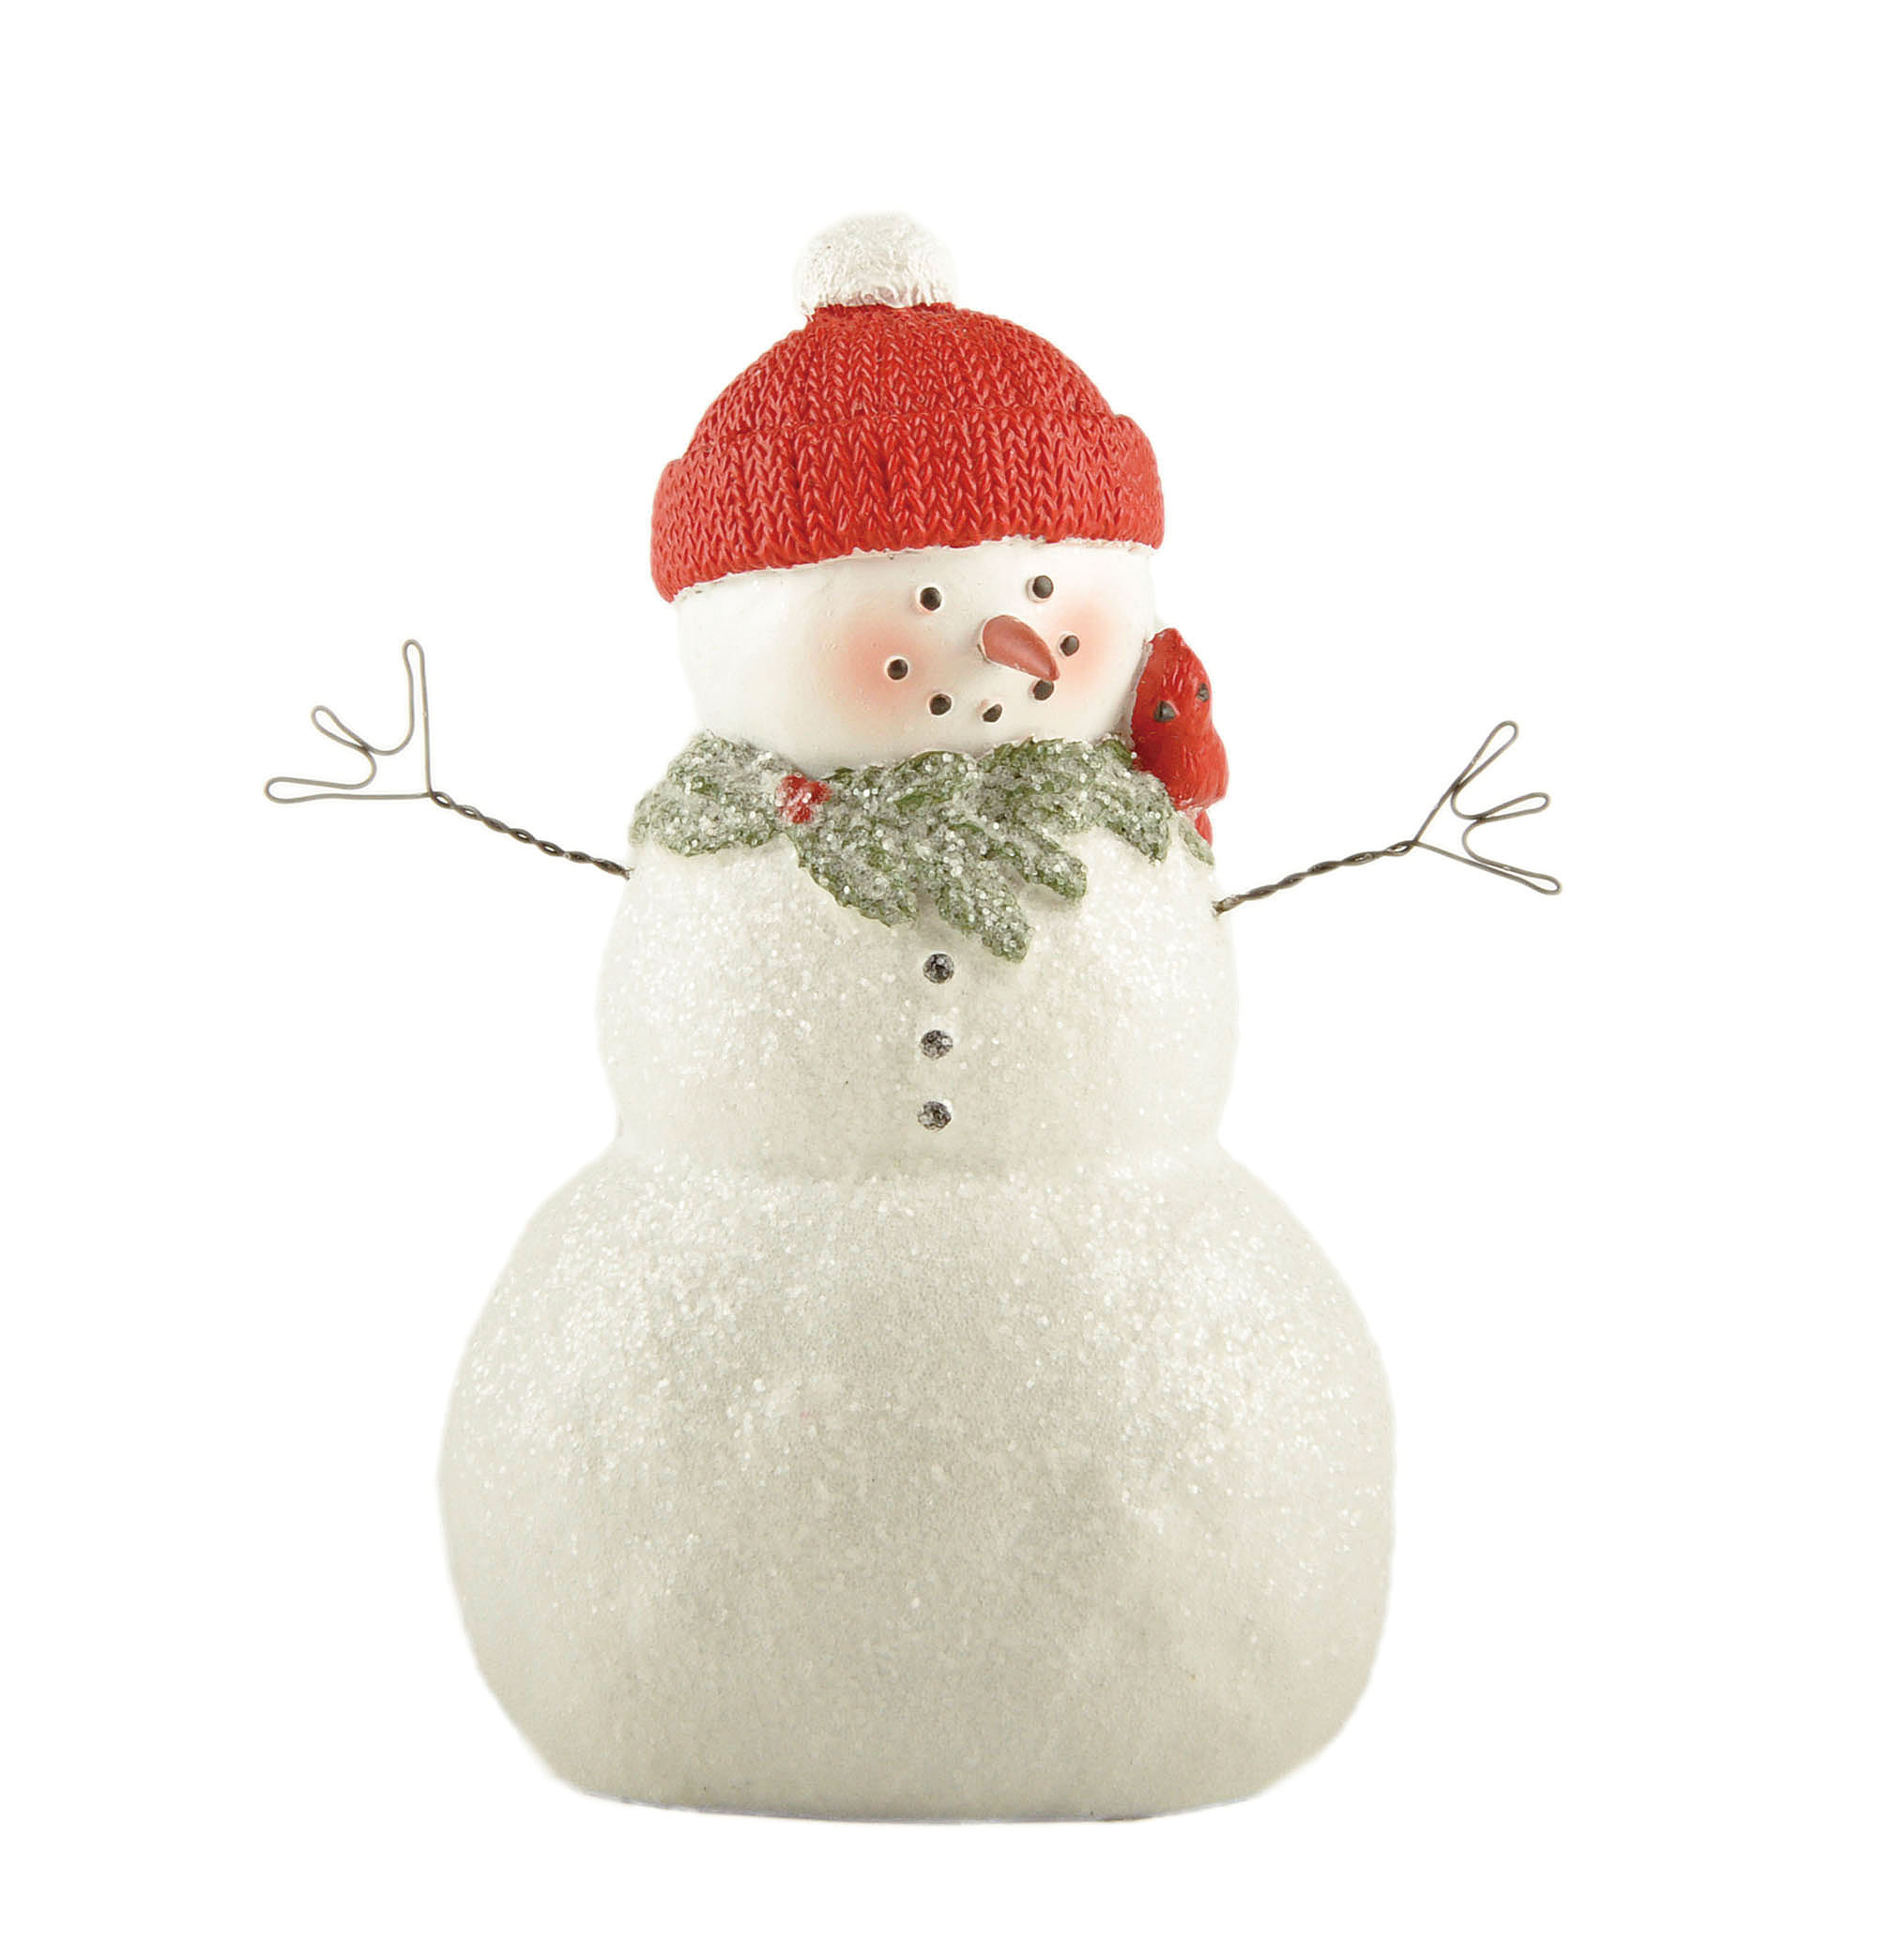 Charming Resin Snowman Figurine with Red Knit Hat and Cardinal Bird – Sparkling Christmas Decoration for Festive Home Decor 238-13813